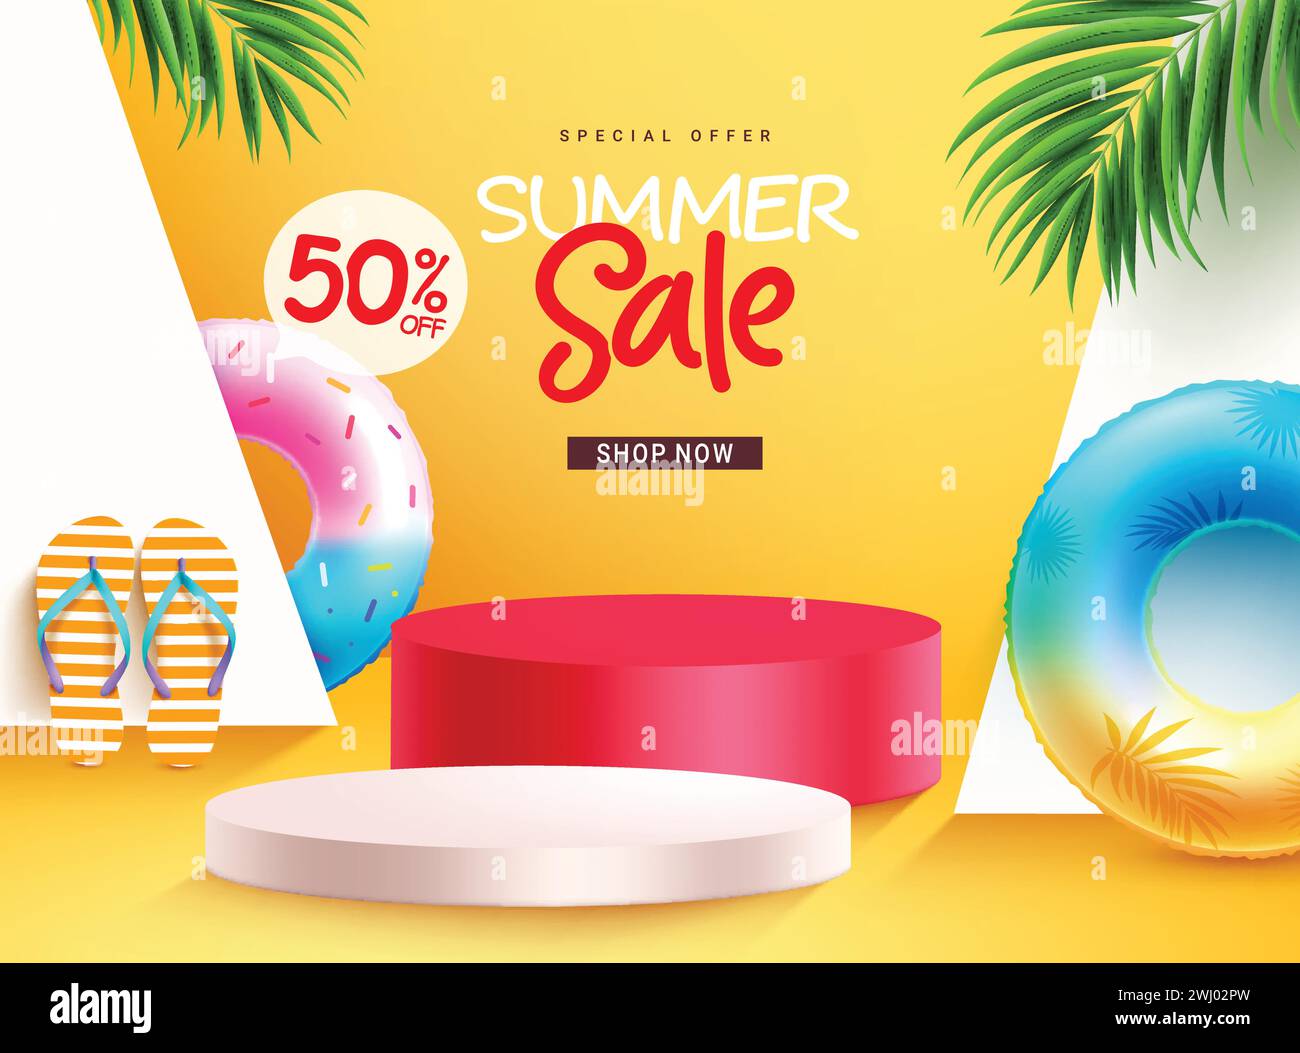 Summer sale podium vector banner design. Summer special offer text with floaters elements and podium stage for seasonal shopping advertisements. Stock Vector